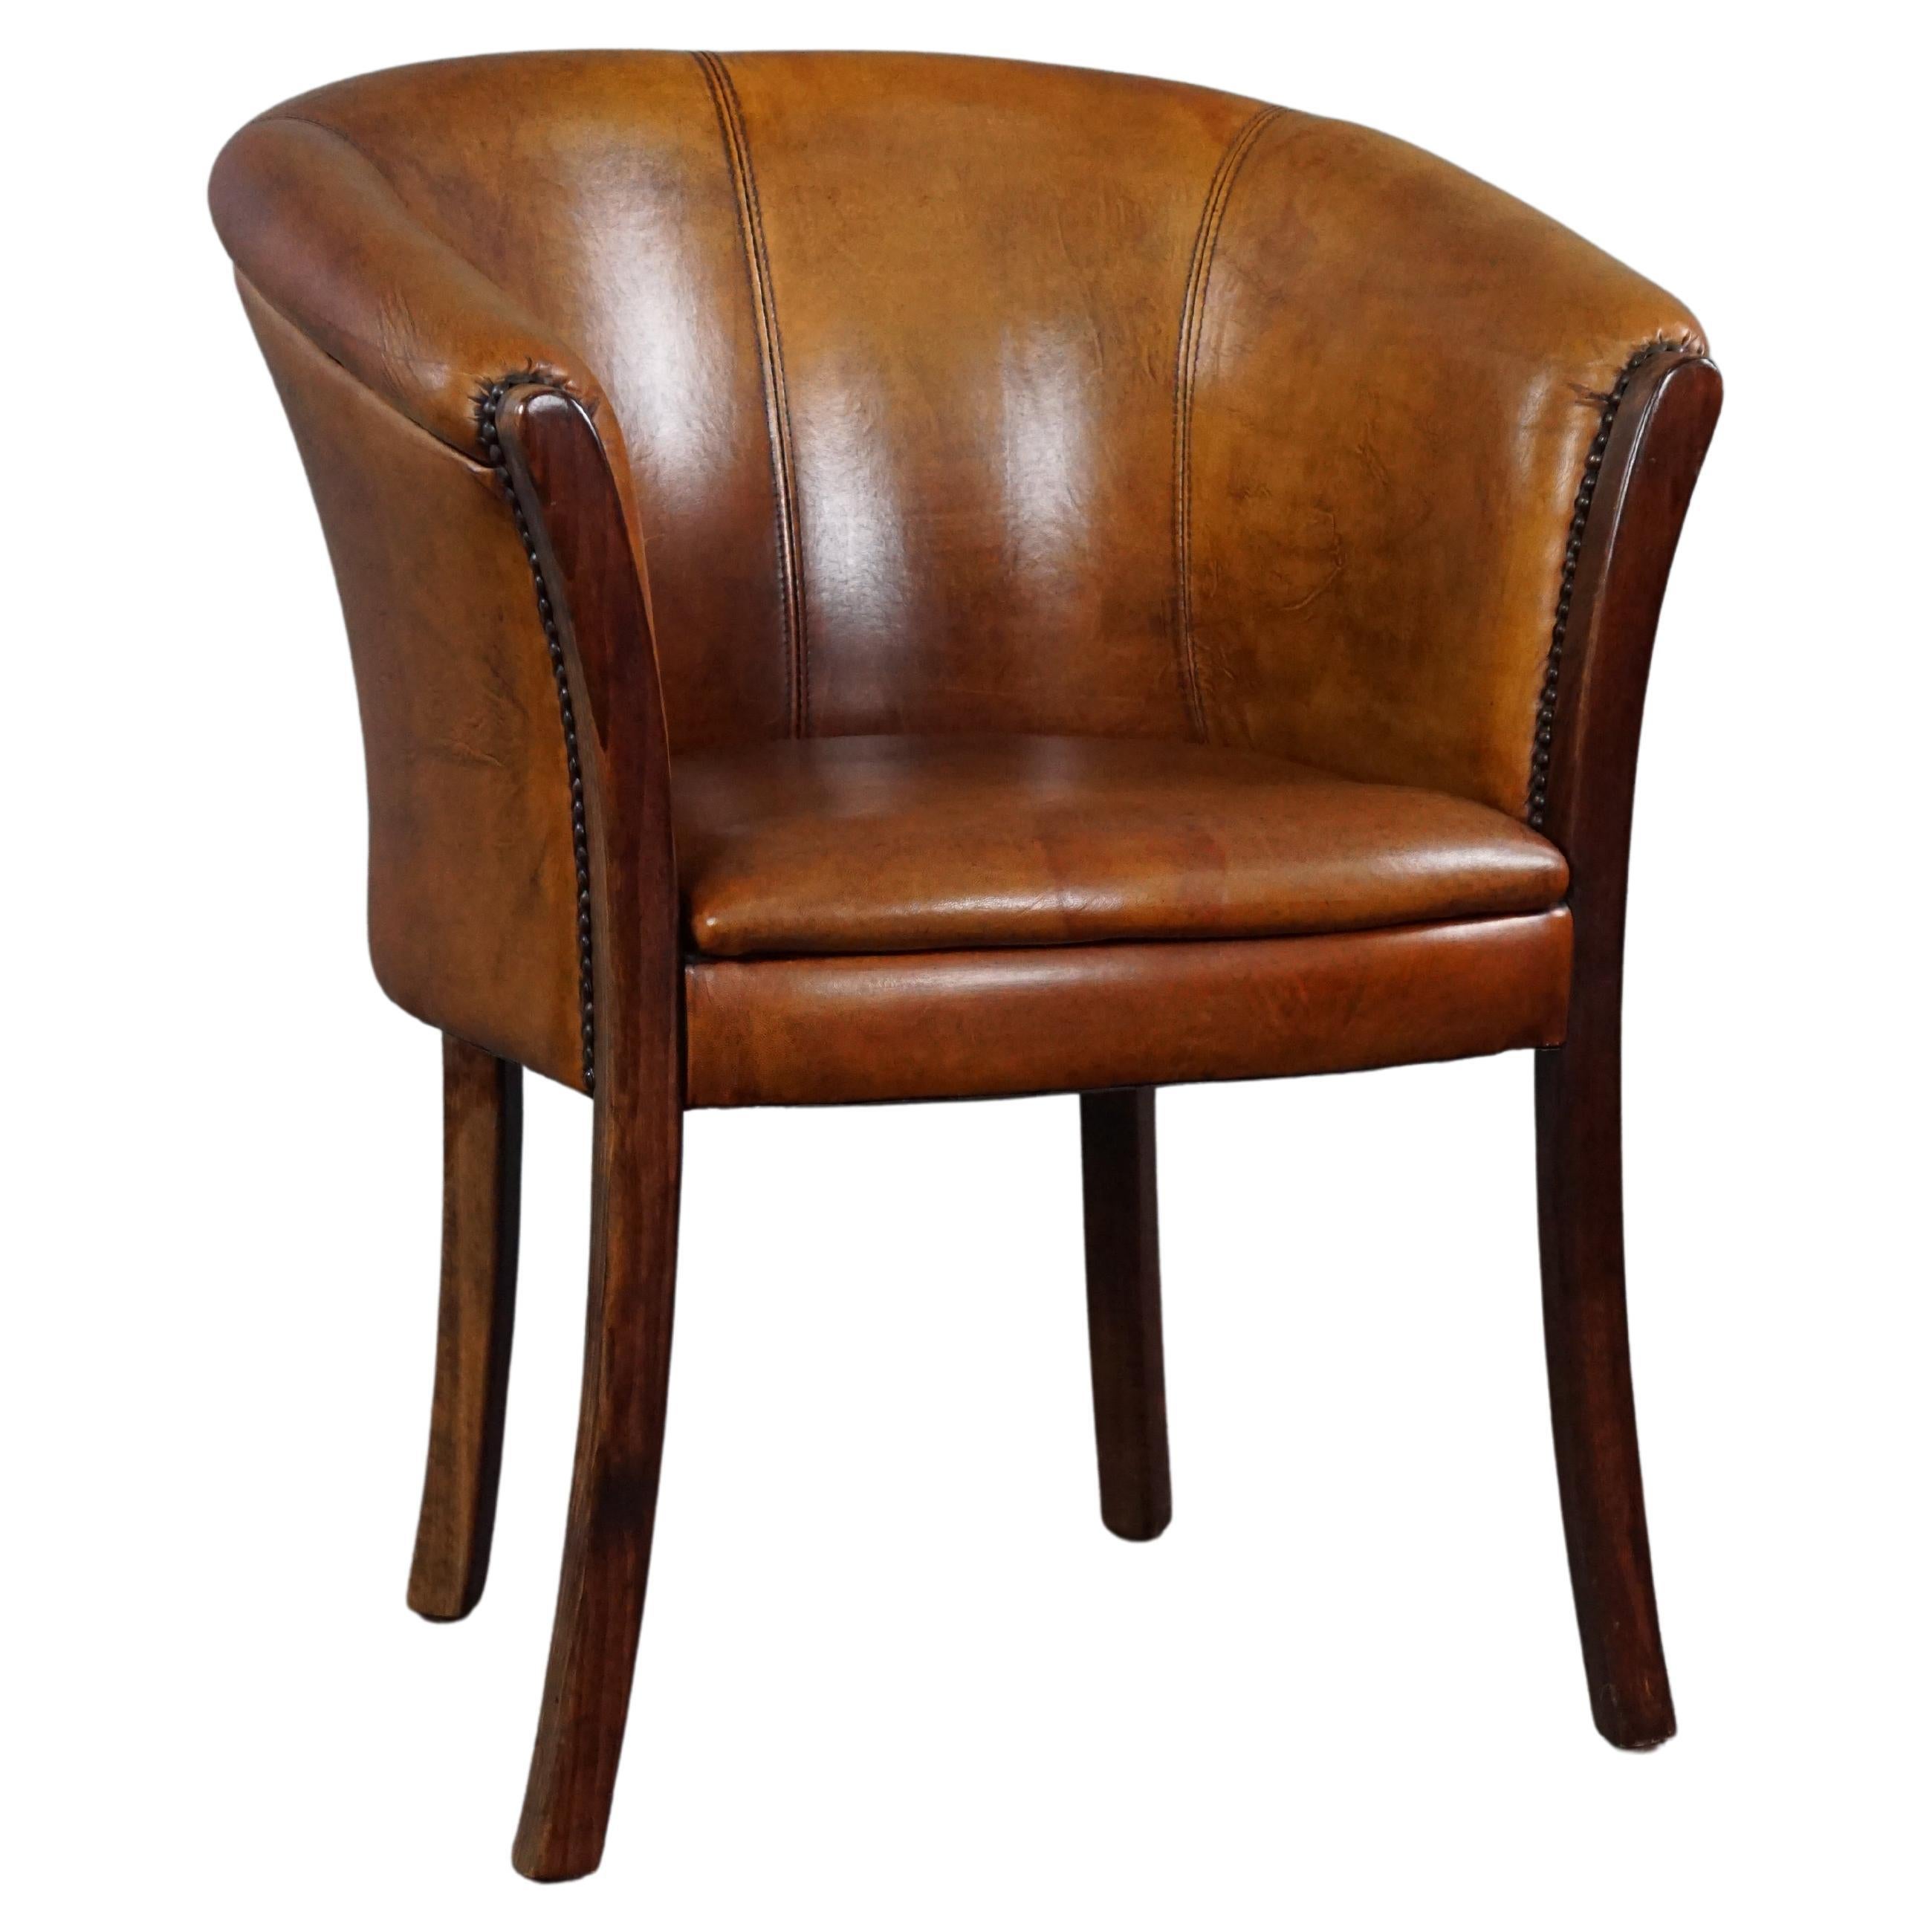 Very expressive side chair/tubchair made of sheep leather For Sale